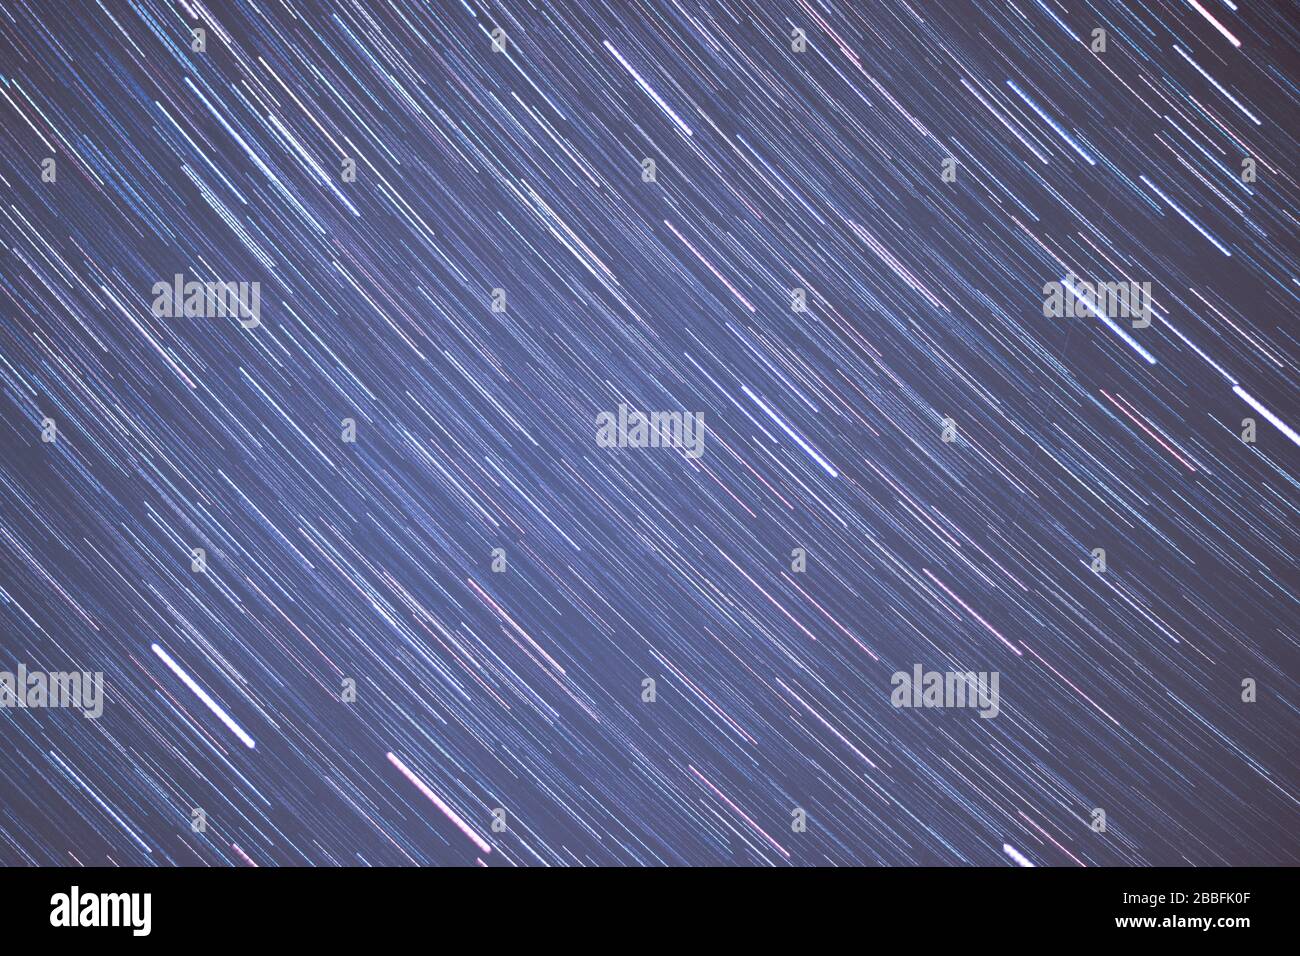 Star trail of half hour of the polar star and adjacent Stock Photo